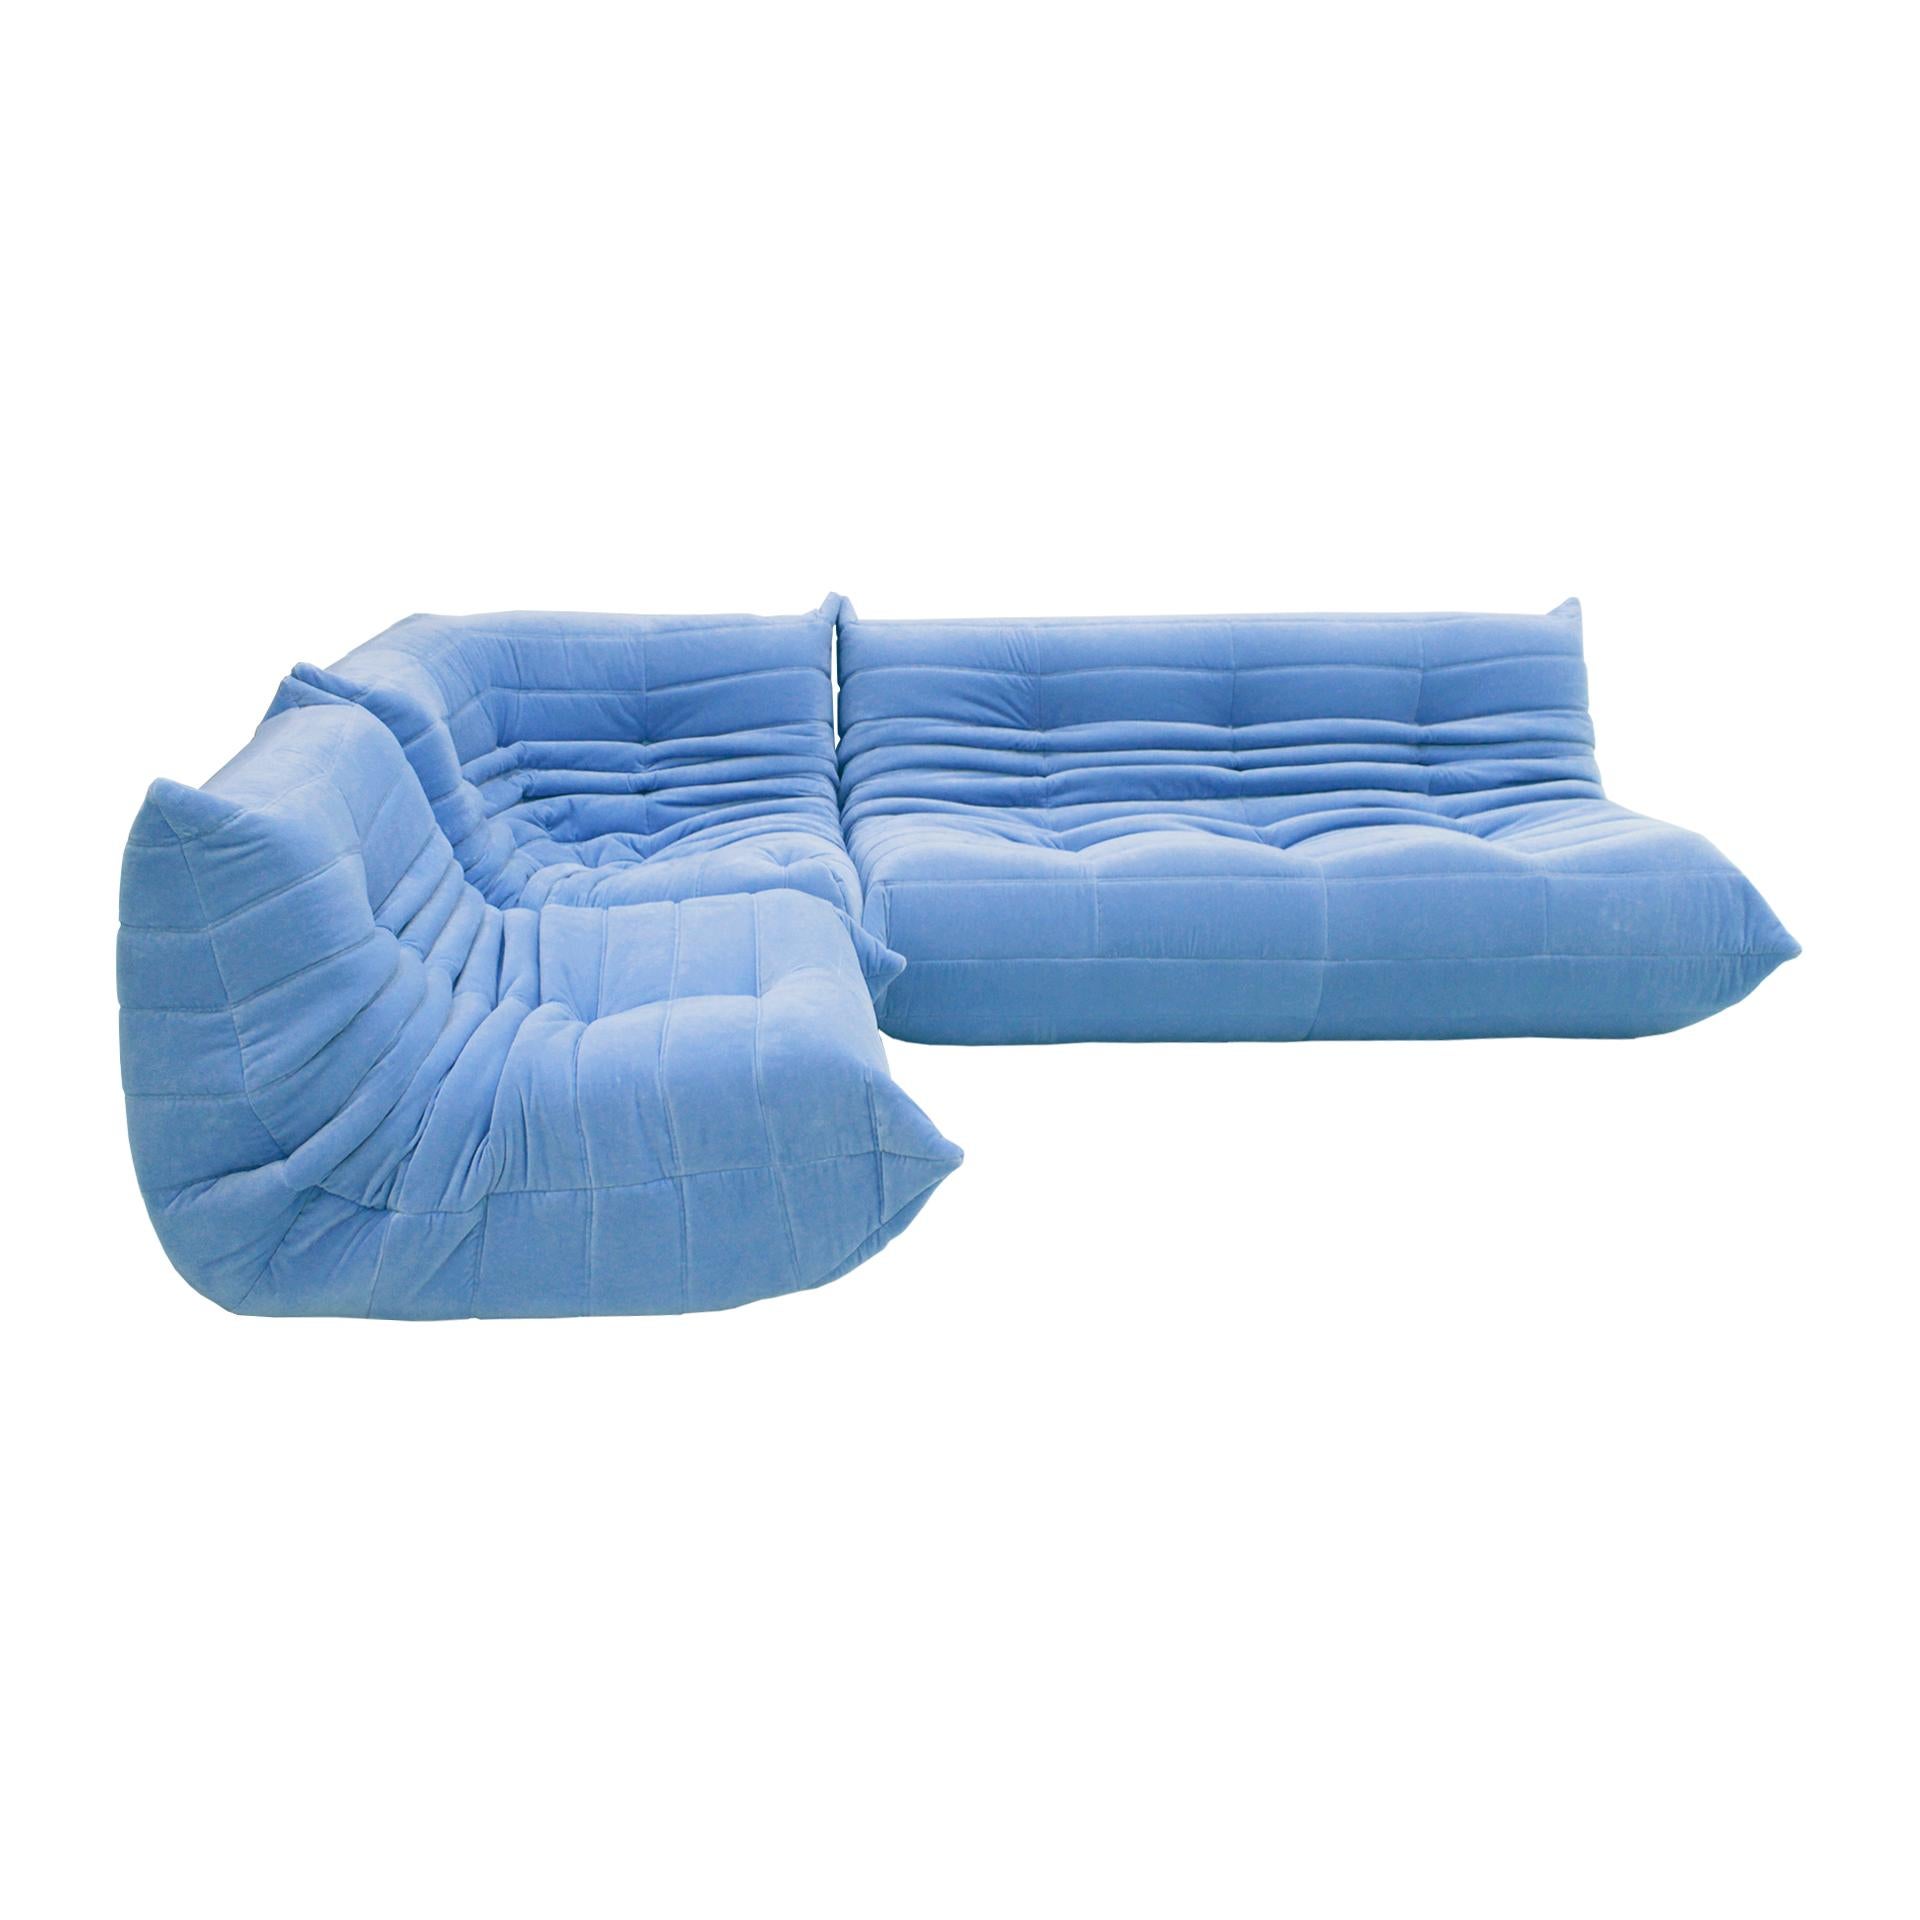 Iconic sofa mod. Togo designed by Michel Ducaroy and manufactured by Ligne Roset in the 1970s. This sectional sofa is reupholstered in blue cotton velvet. These sofa is incredibly comfortable.
This iconic piece is recognisable by its carachteristic